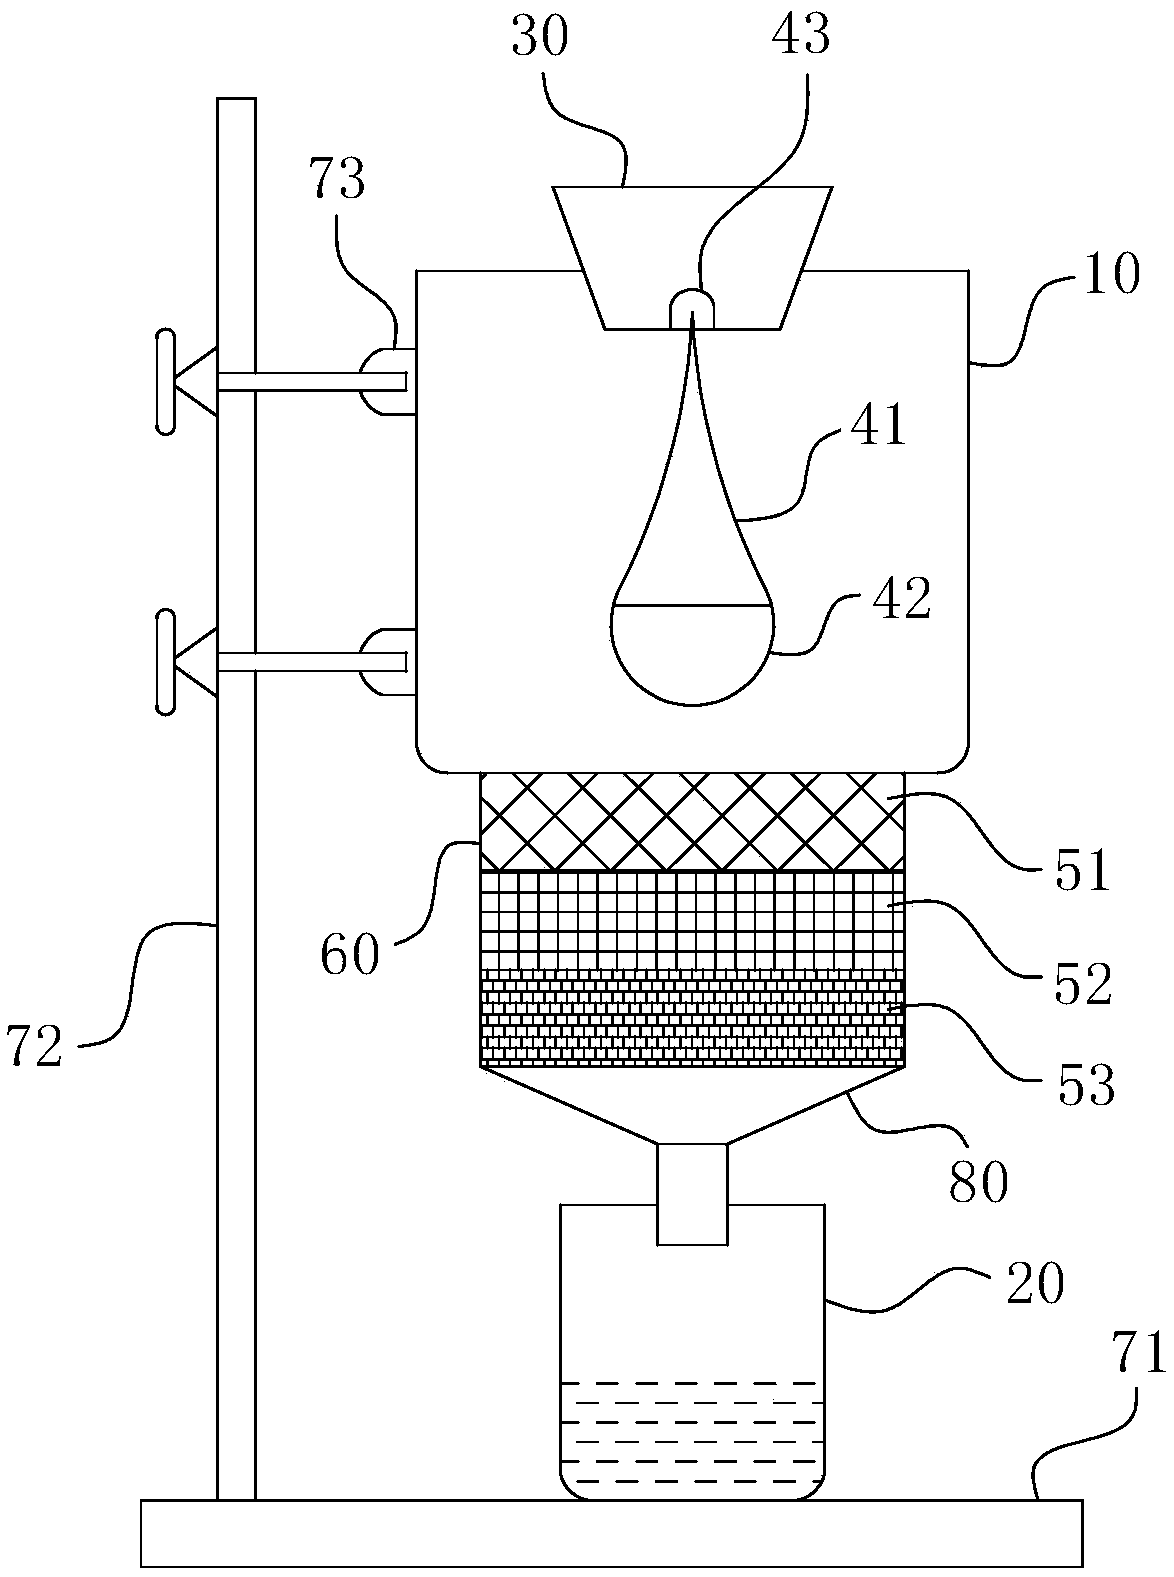 Rapid filtering device for tea samples